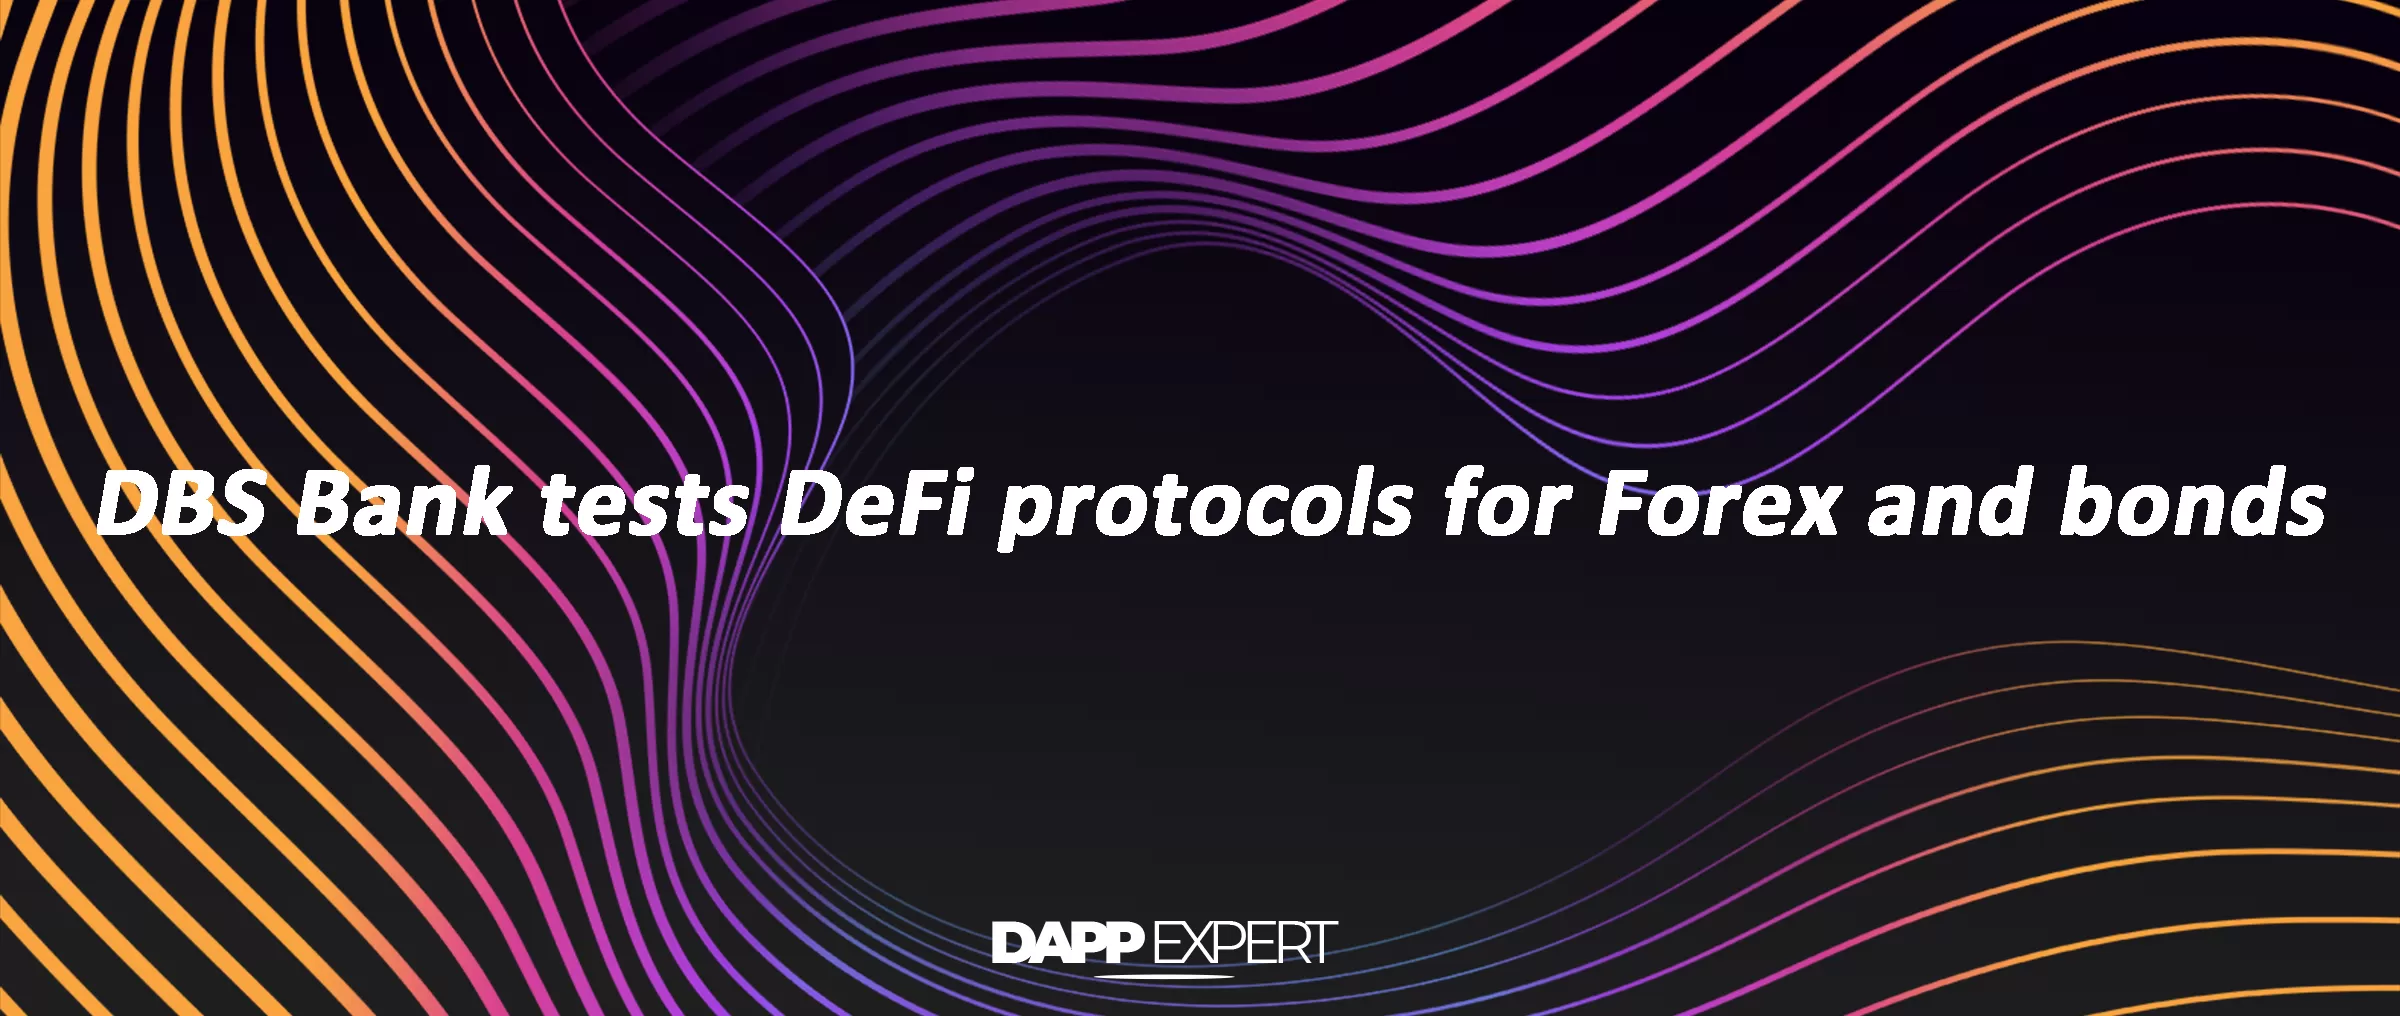 DBS Bank tests DeFi protocols for Forex and bonds